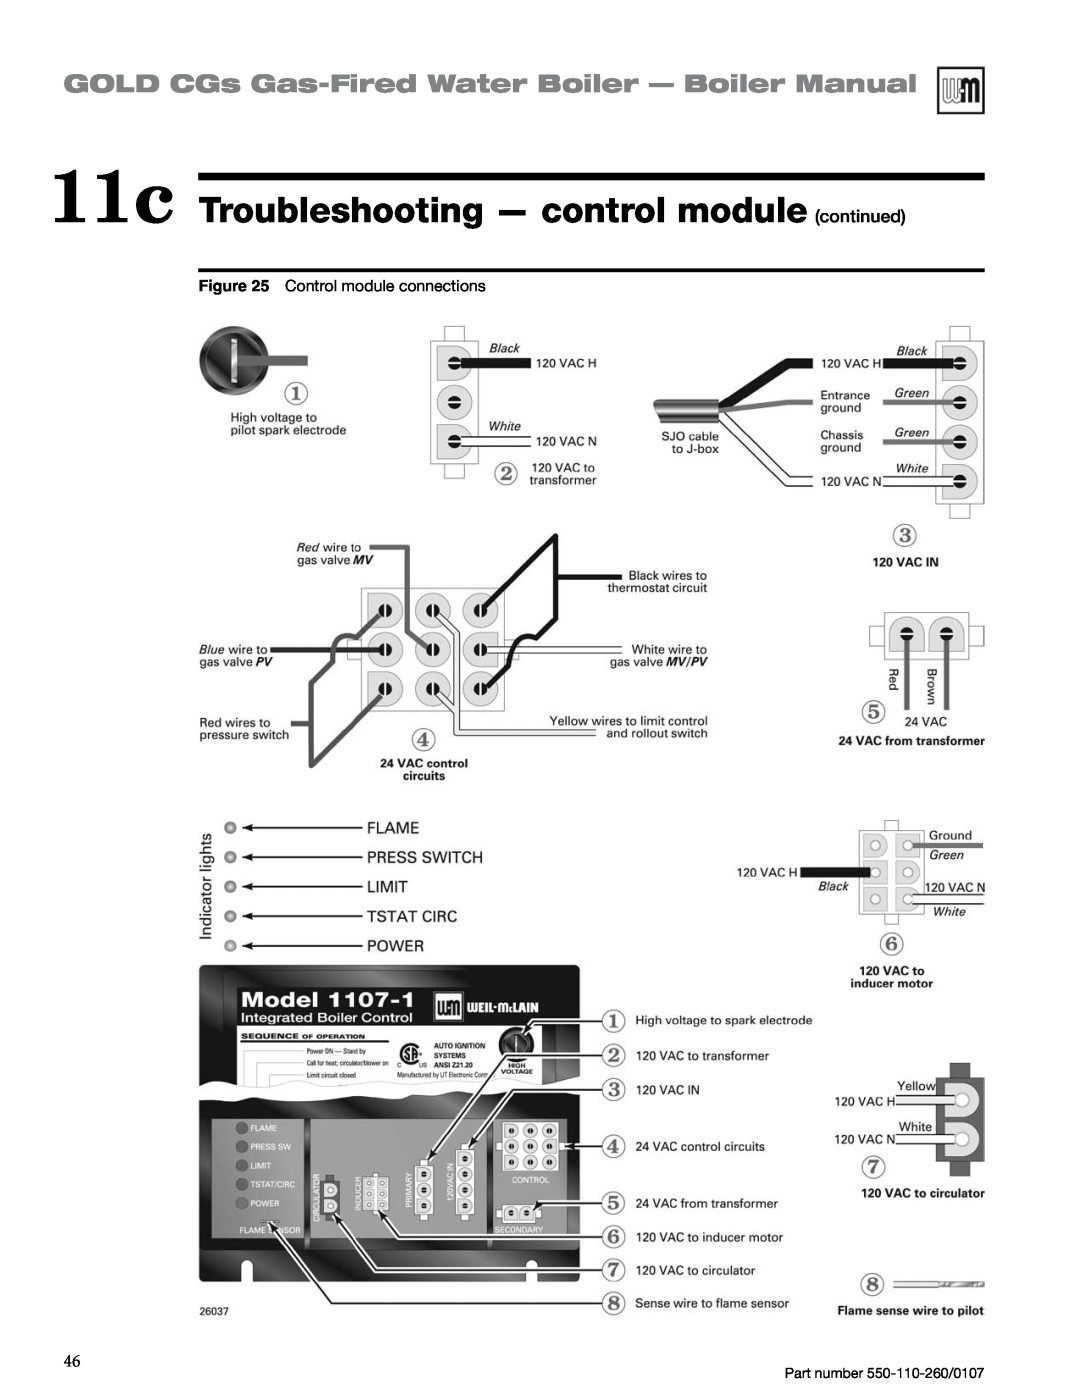 Weil-McLain 550-110-260/0107 manual 11c Troubleshooting — control module continued, Control module connections 